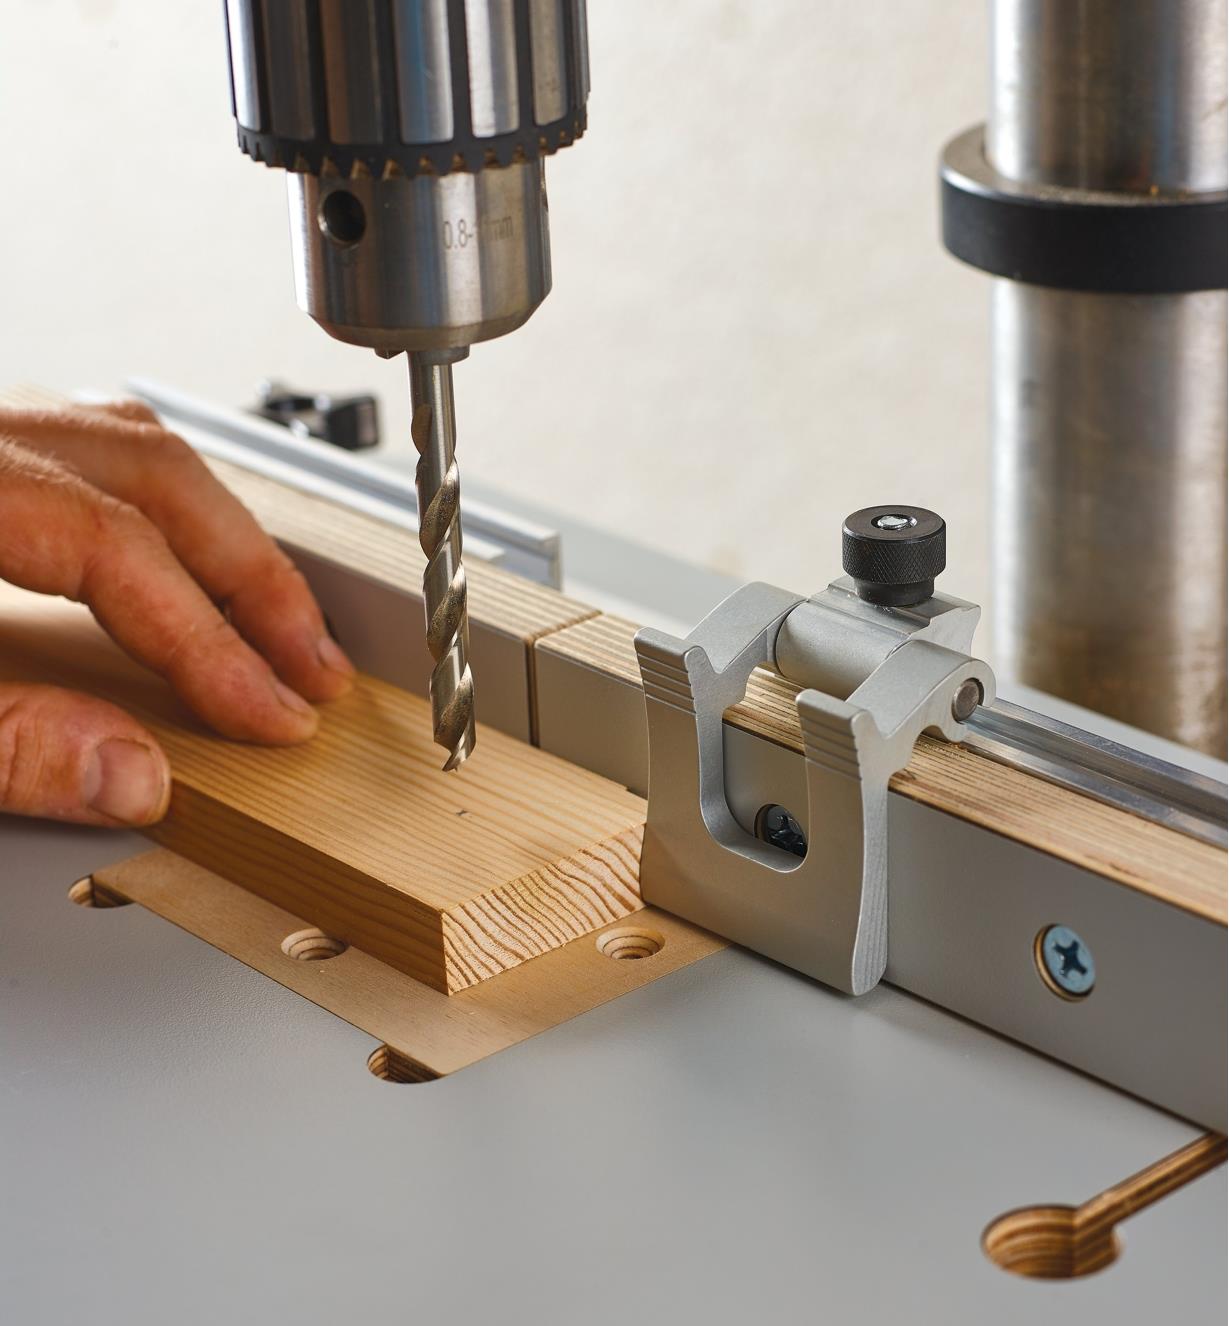 A Veritas 1 1/2" flip stop mounted in the T-track on the drill-press table’s fence